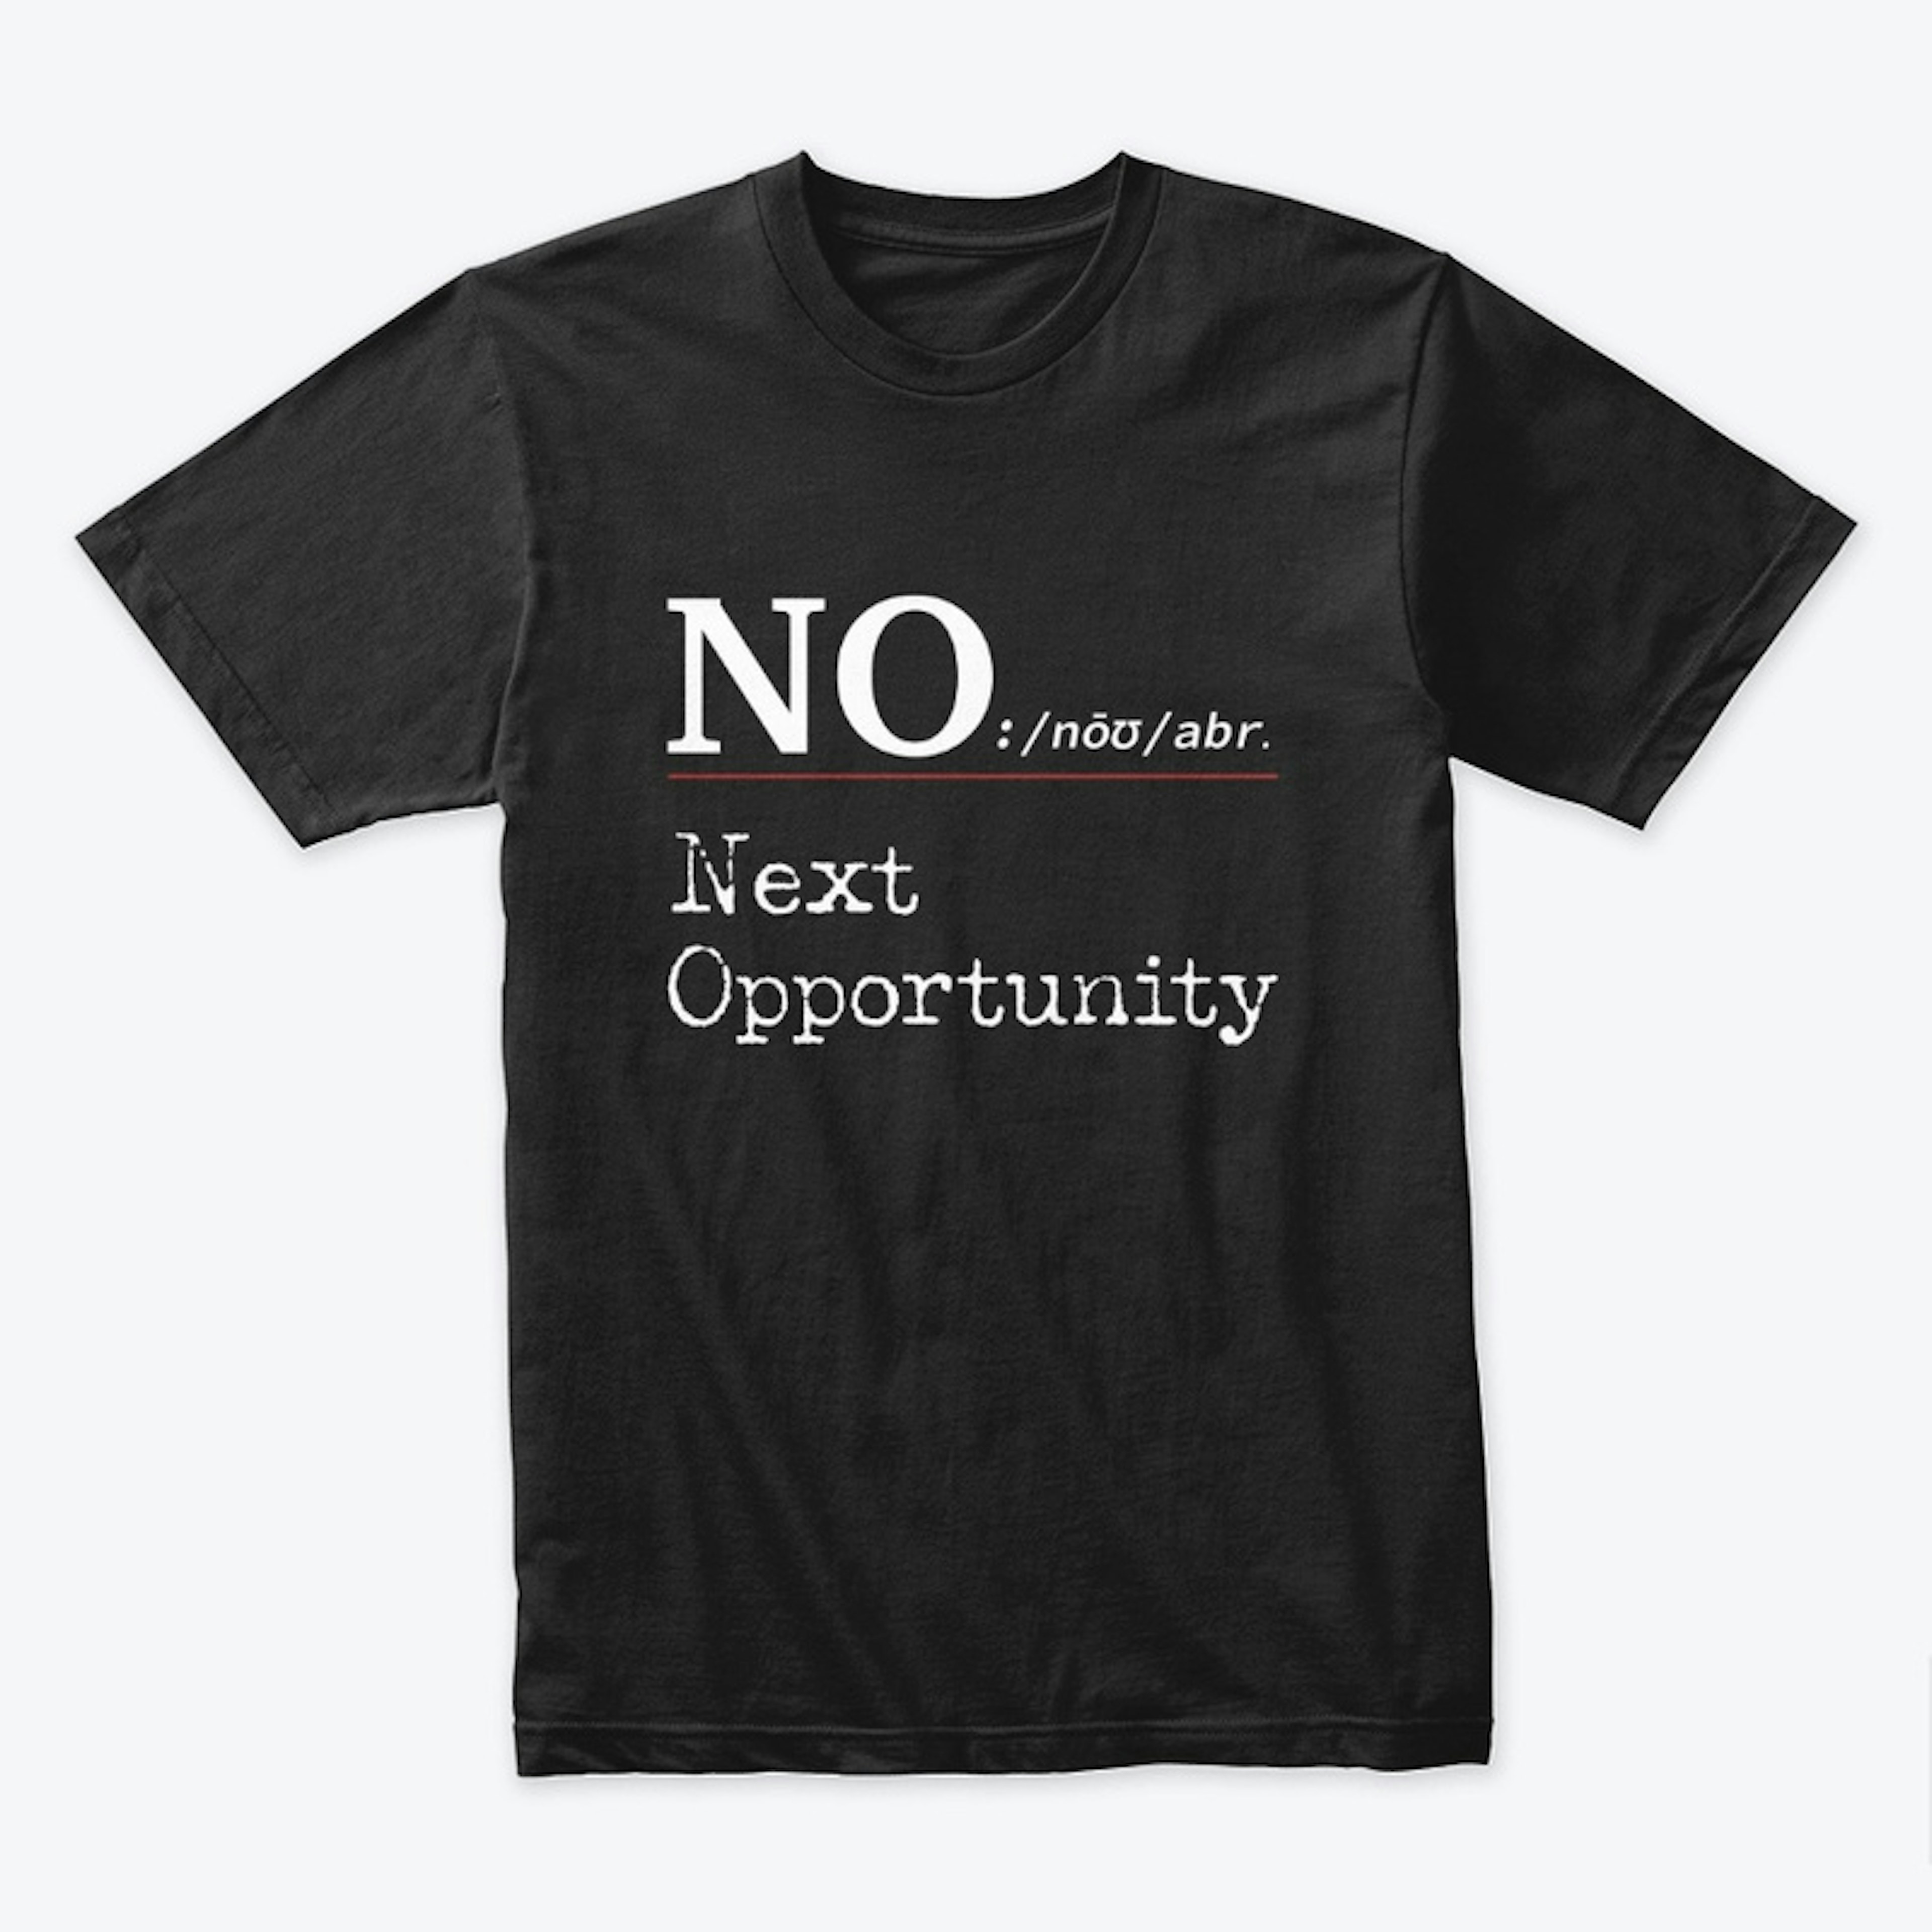 NO = Next Opportunity